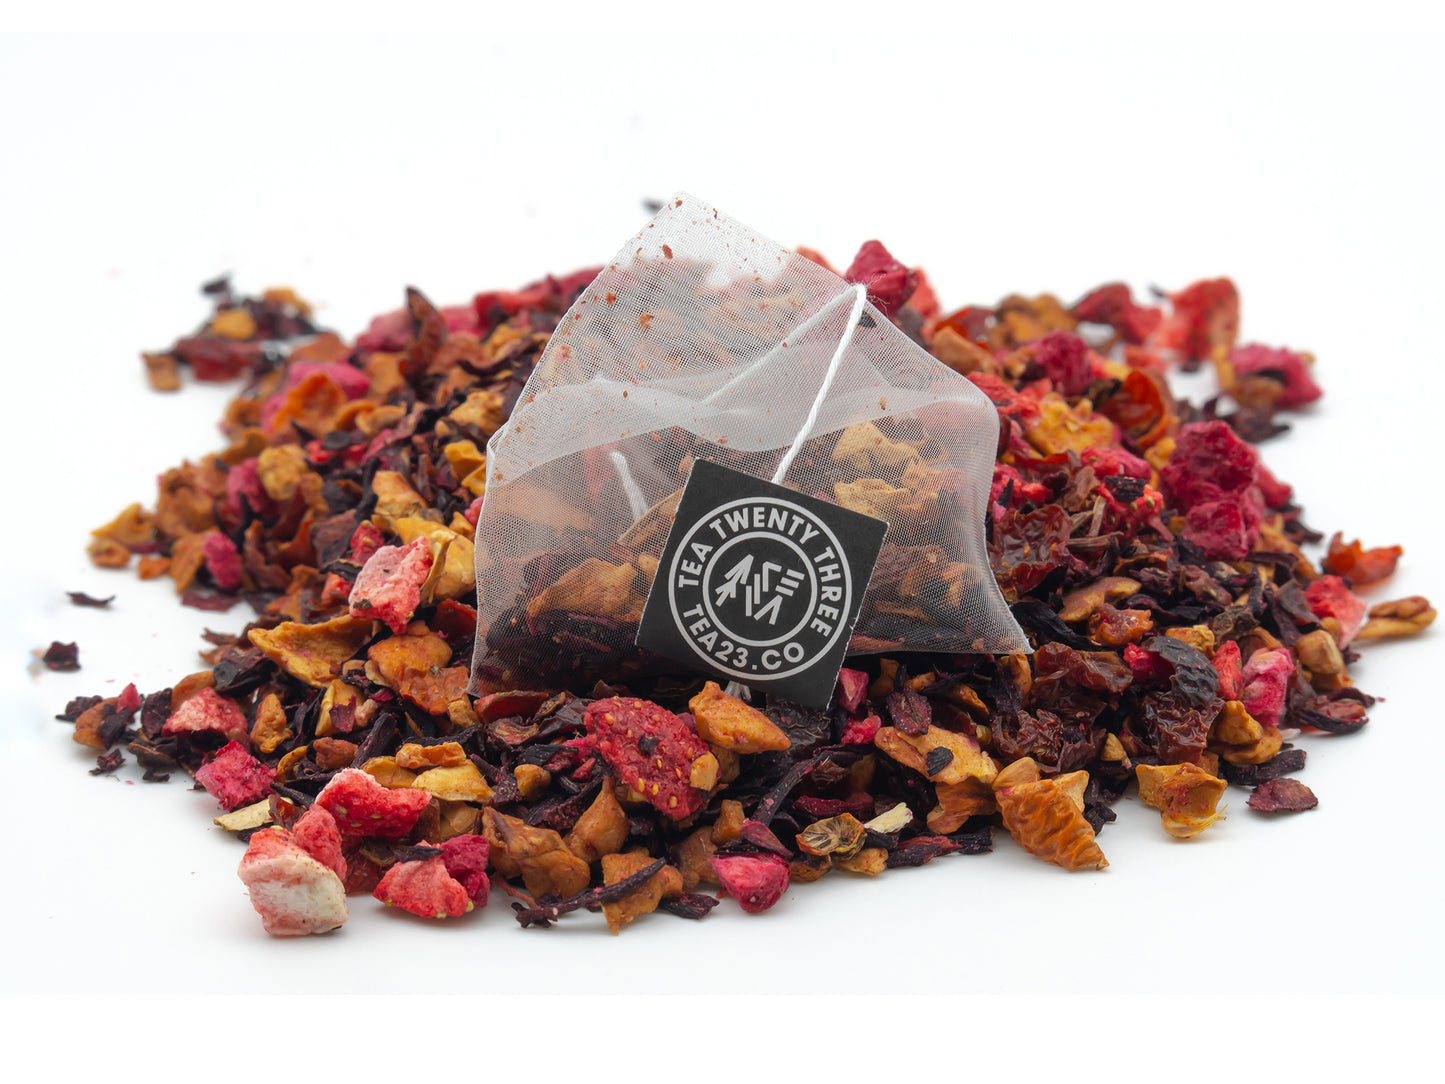 Red Berry fruit tea in a pyramid tea bag from TEA23